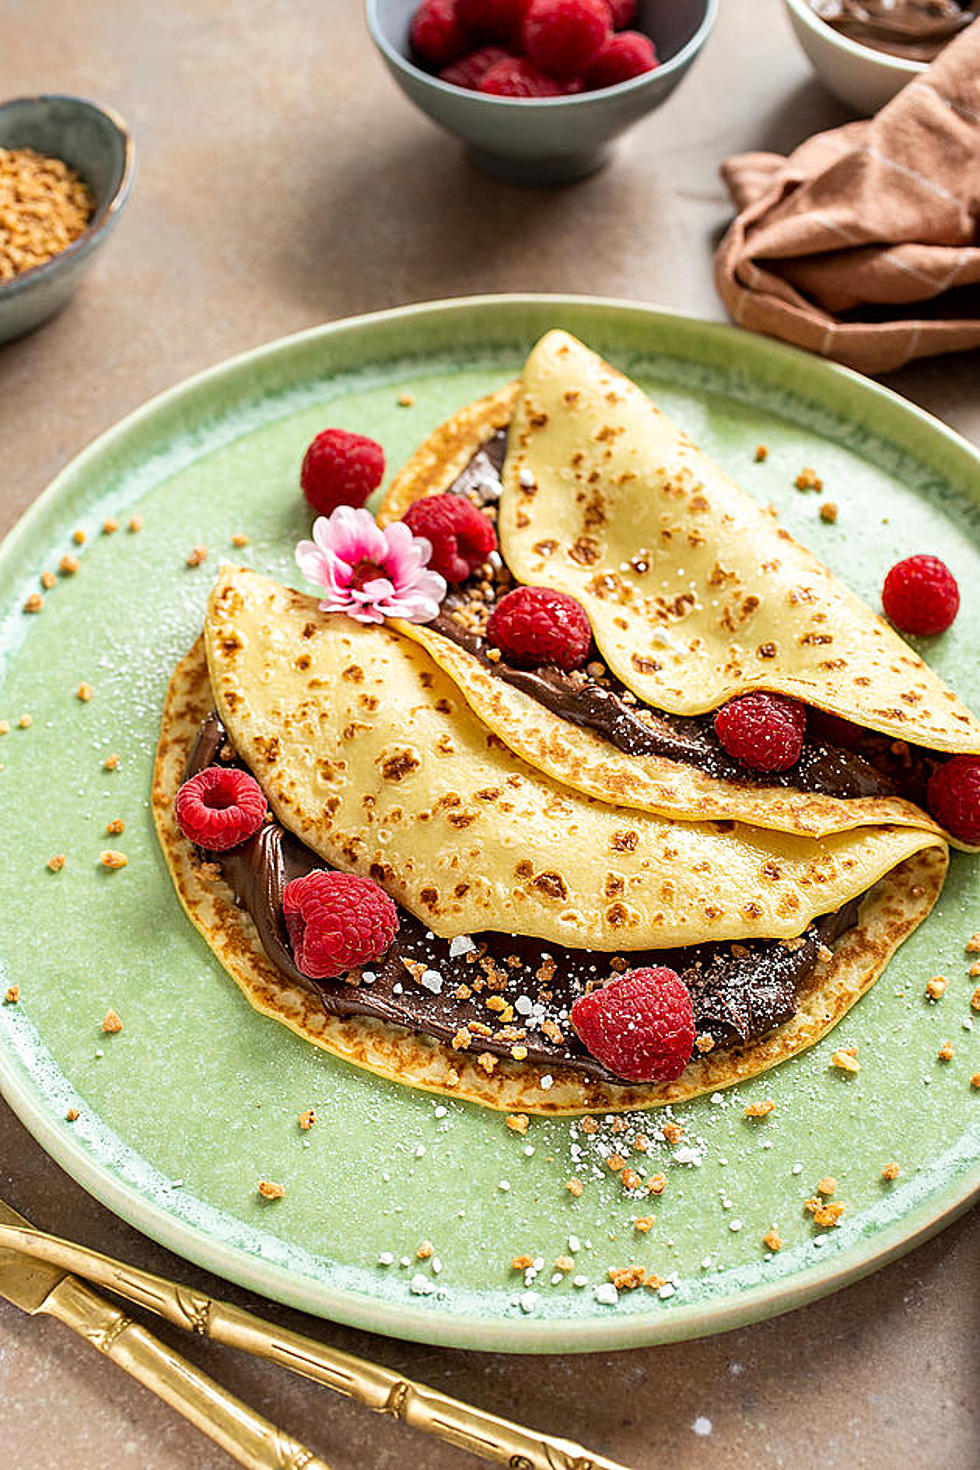 Sweet Vegan Crêpes Filled with Nutella, Hazelnuts, and Raspberries